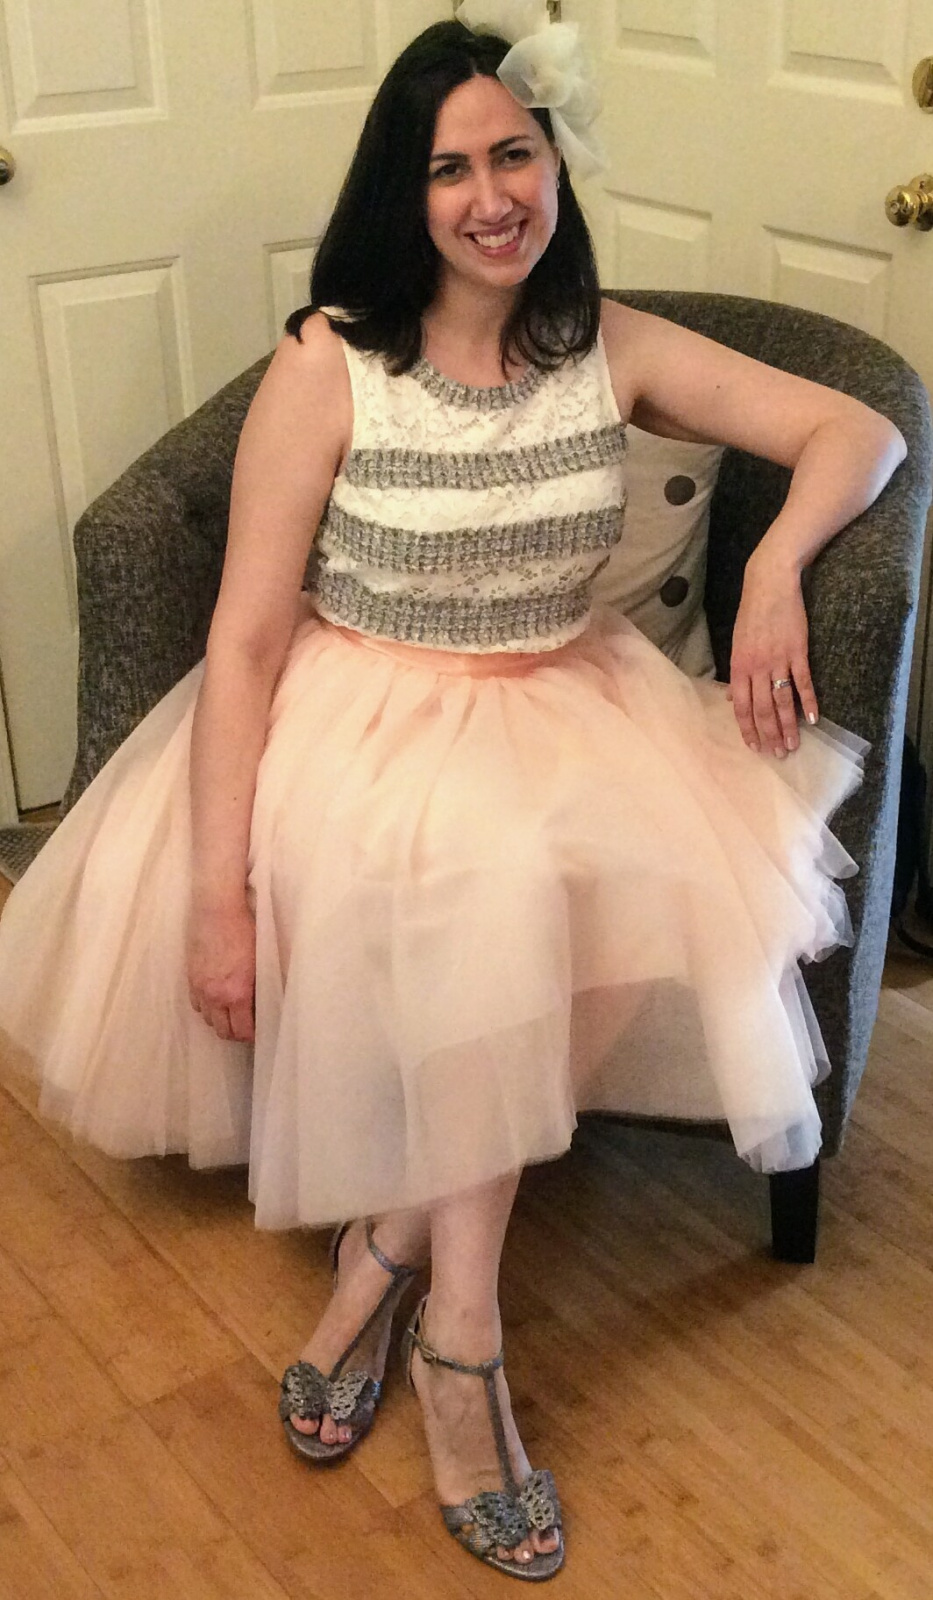 Don't let the tutu fool you- I'm 34, not 4.